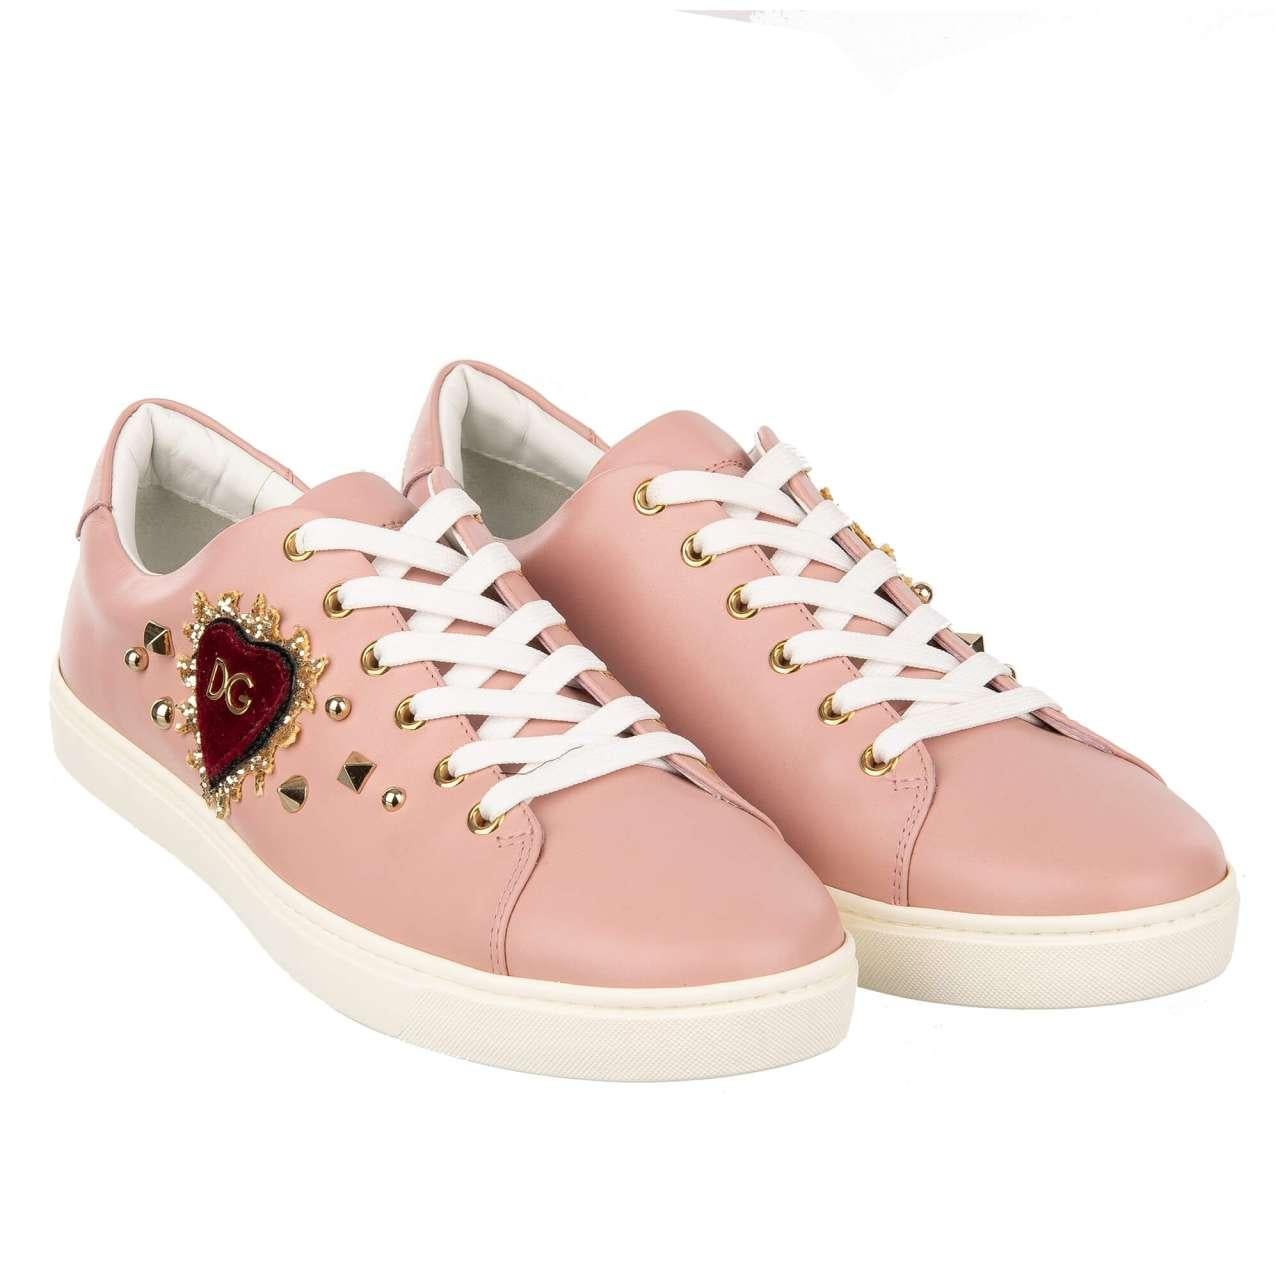 - Leather Sneaker LONDON with DG velvet Heart patch and studs in light pink and white by DOLCE & GABBANA - New with Box - MADE IN ITALY - Model: CK0167-B5294-8H415 - Material: 100% Calf leather - Sole: Rubber - Color: White / Pink - DG Heart velvet